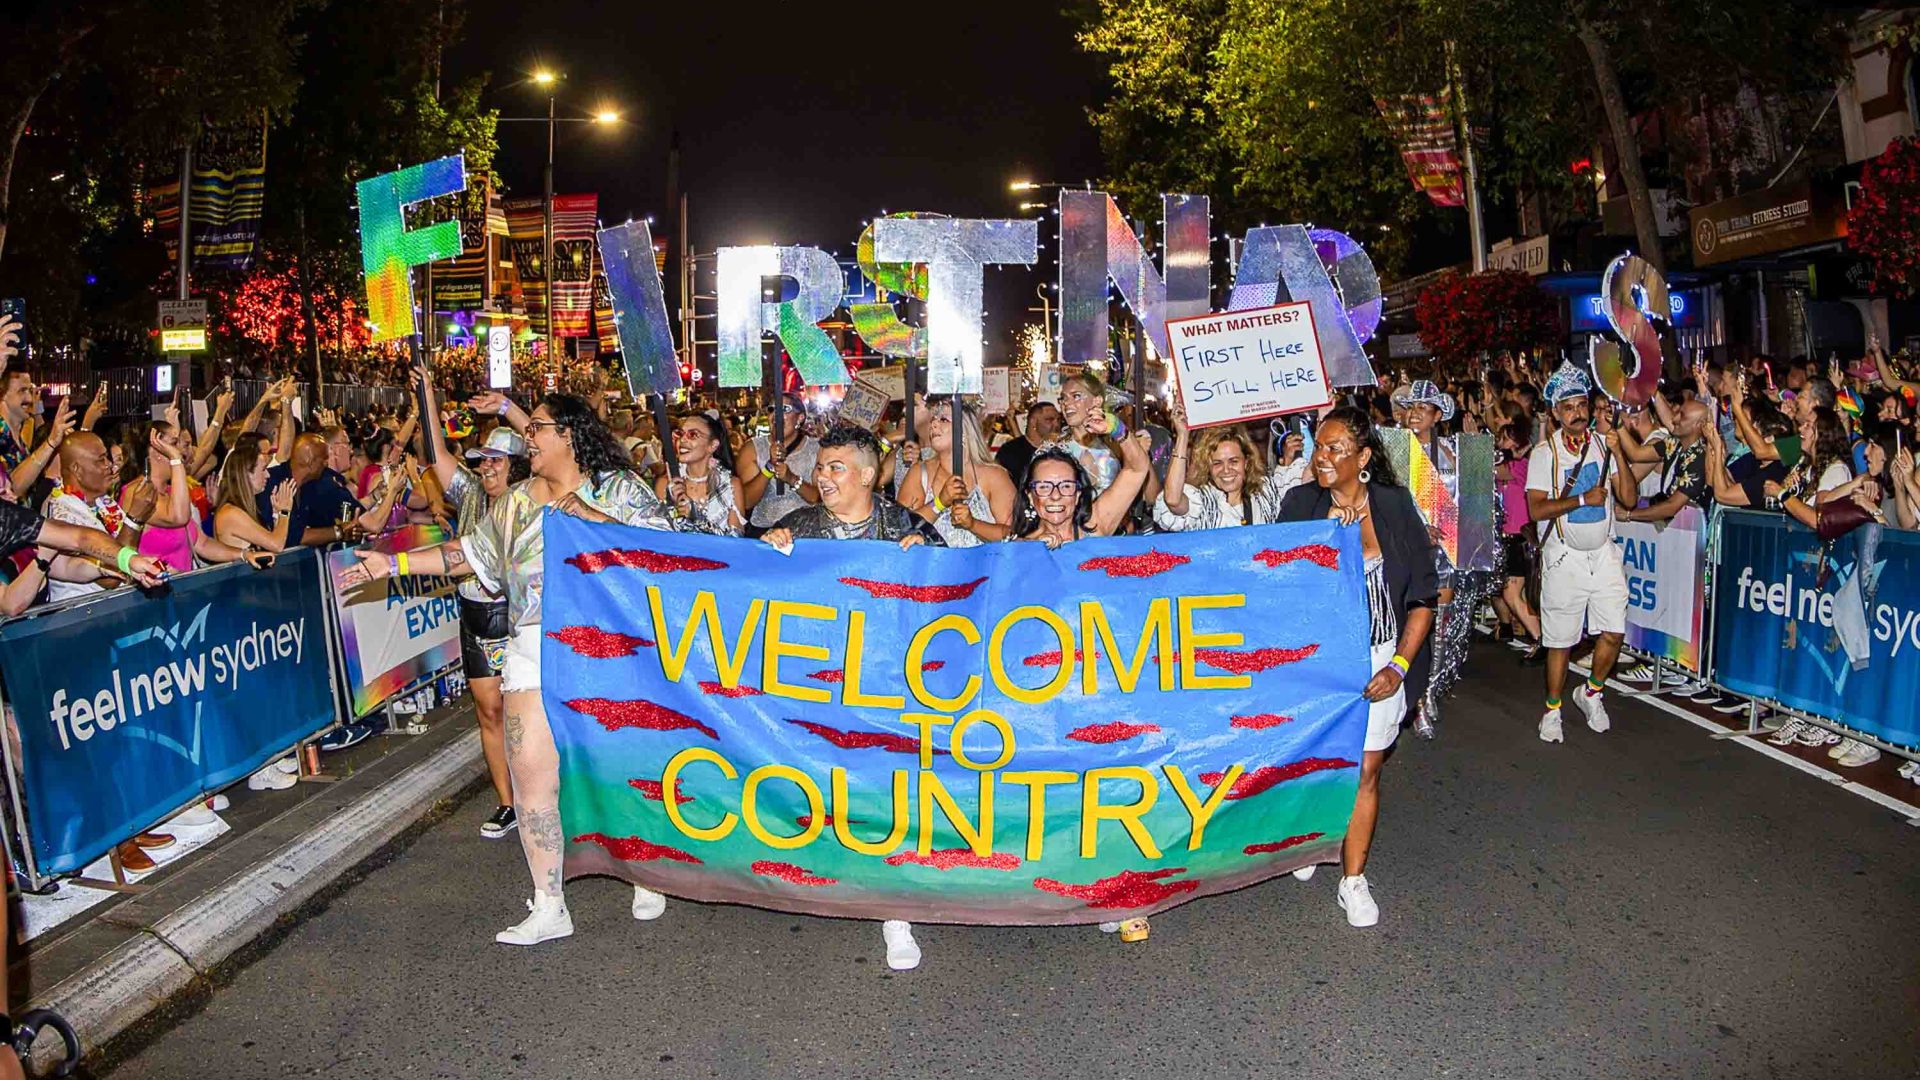 A First Nations group marches in the Sydney Mardi Gras. They hold a banner that reads 'Welcome to country'.